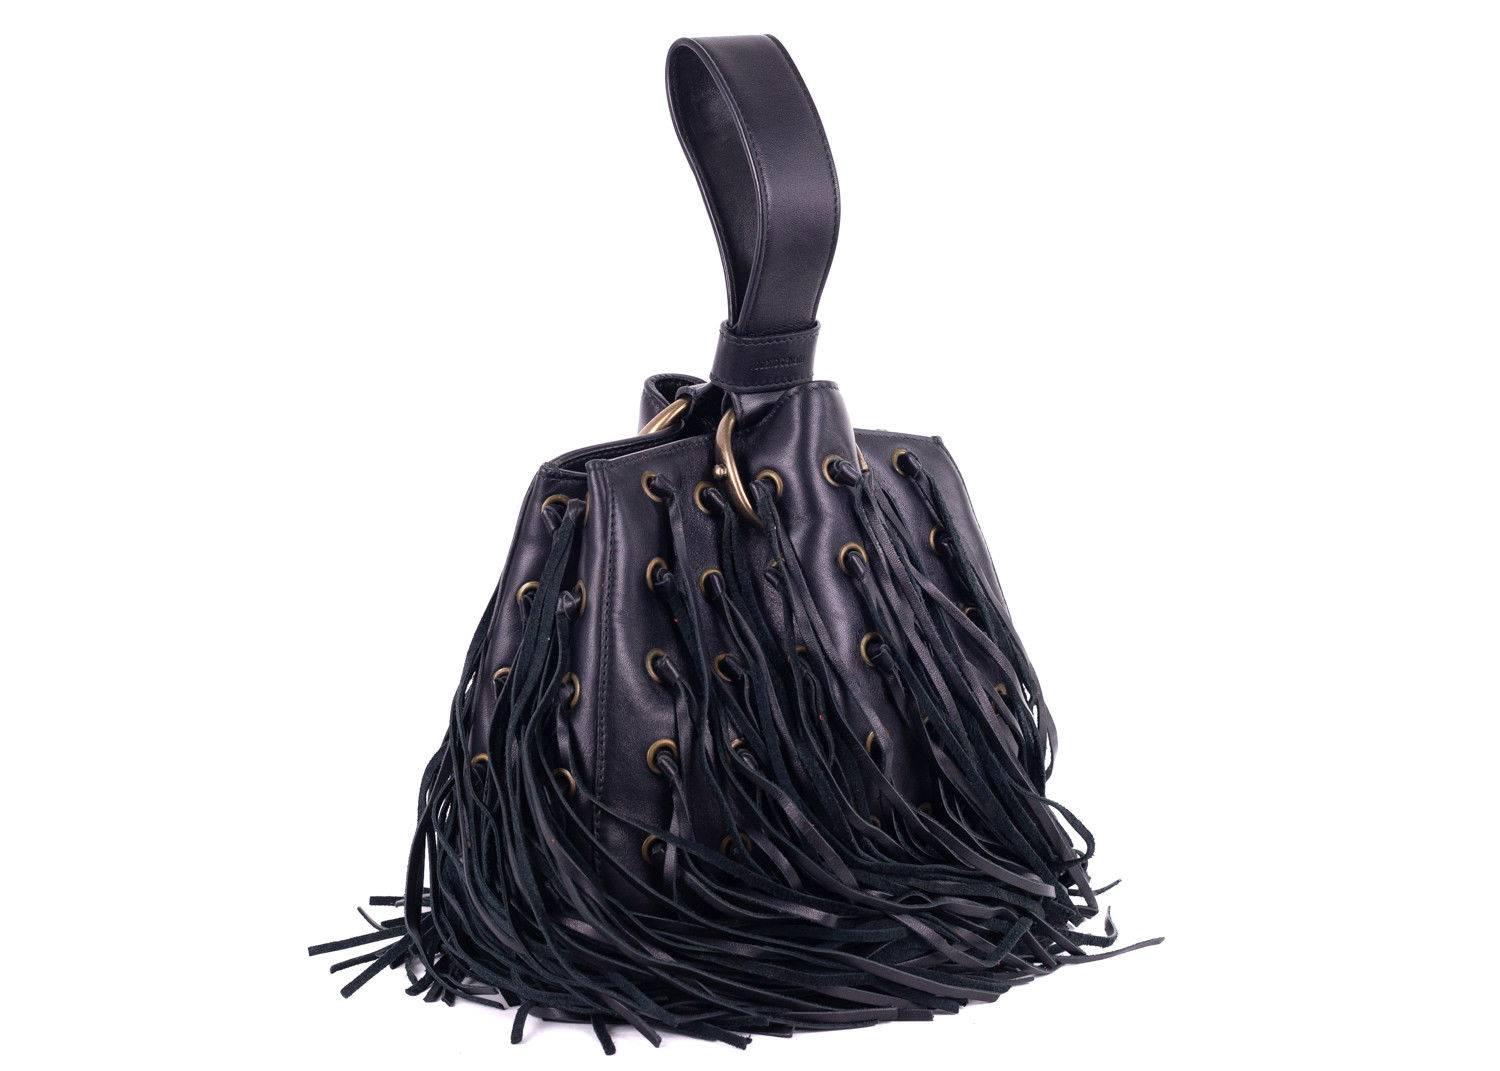 Roberto Cavalli black leather wristlet bucket bag. This bag features eyelet patterns with fringe detailing and a wristlet. Perfect summer bag, this bag can be paired with dark wash shorts or denimm with a floral top and sandals for this bag to